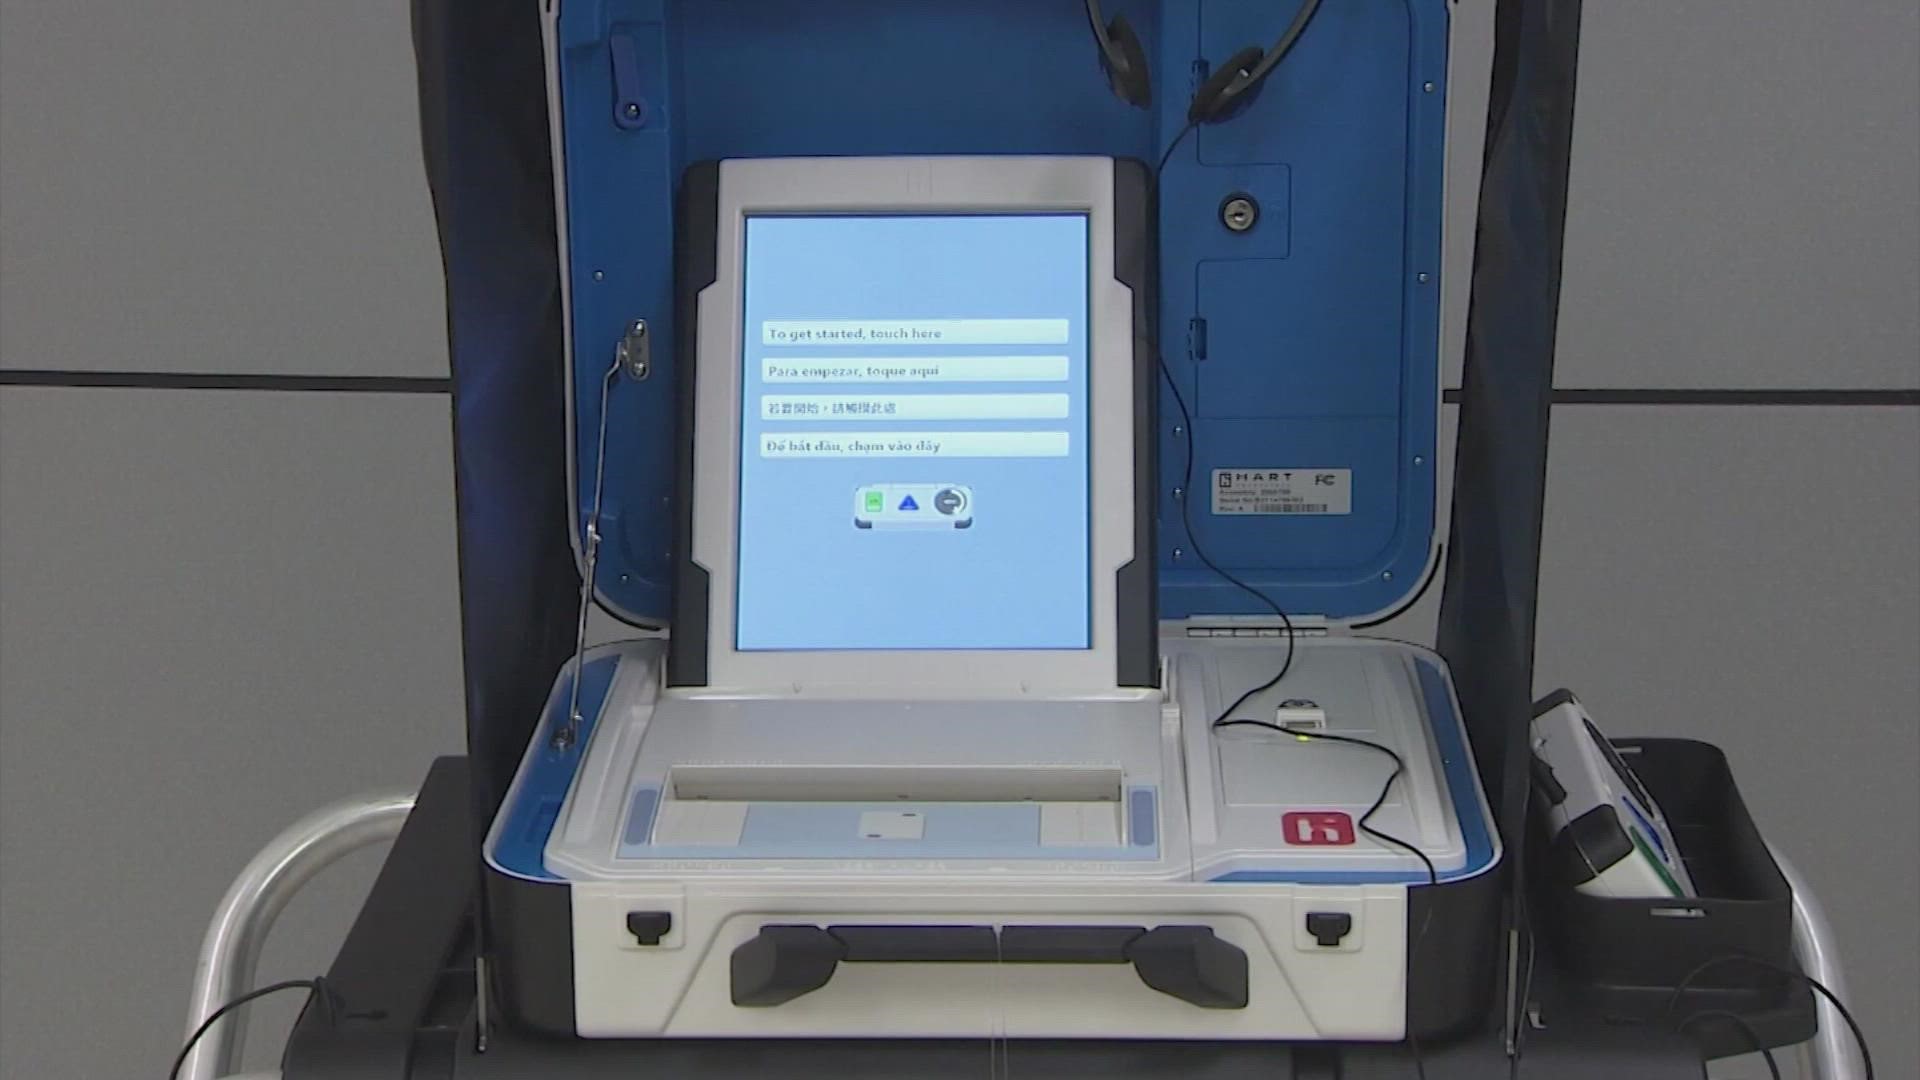 Harris County is rolling out new voting machines at all locations for this election after a soft launch in May.